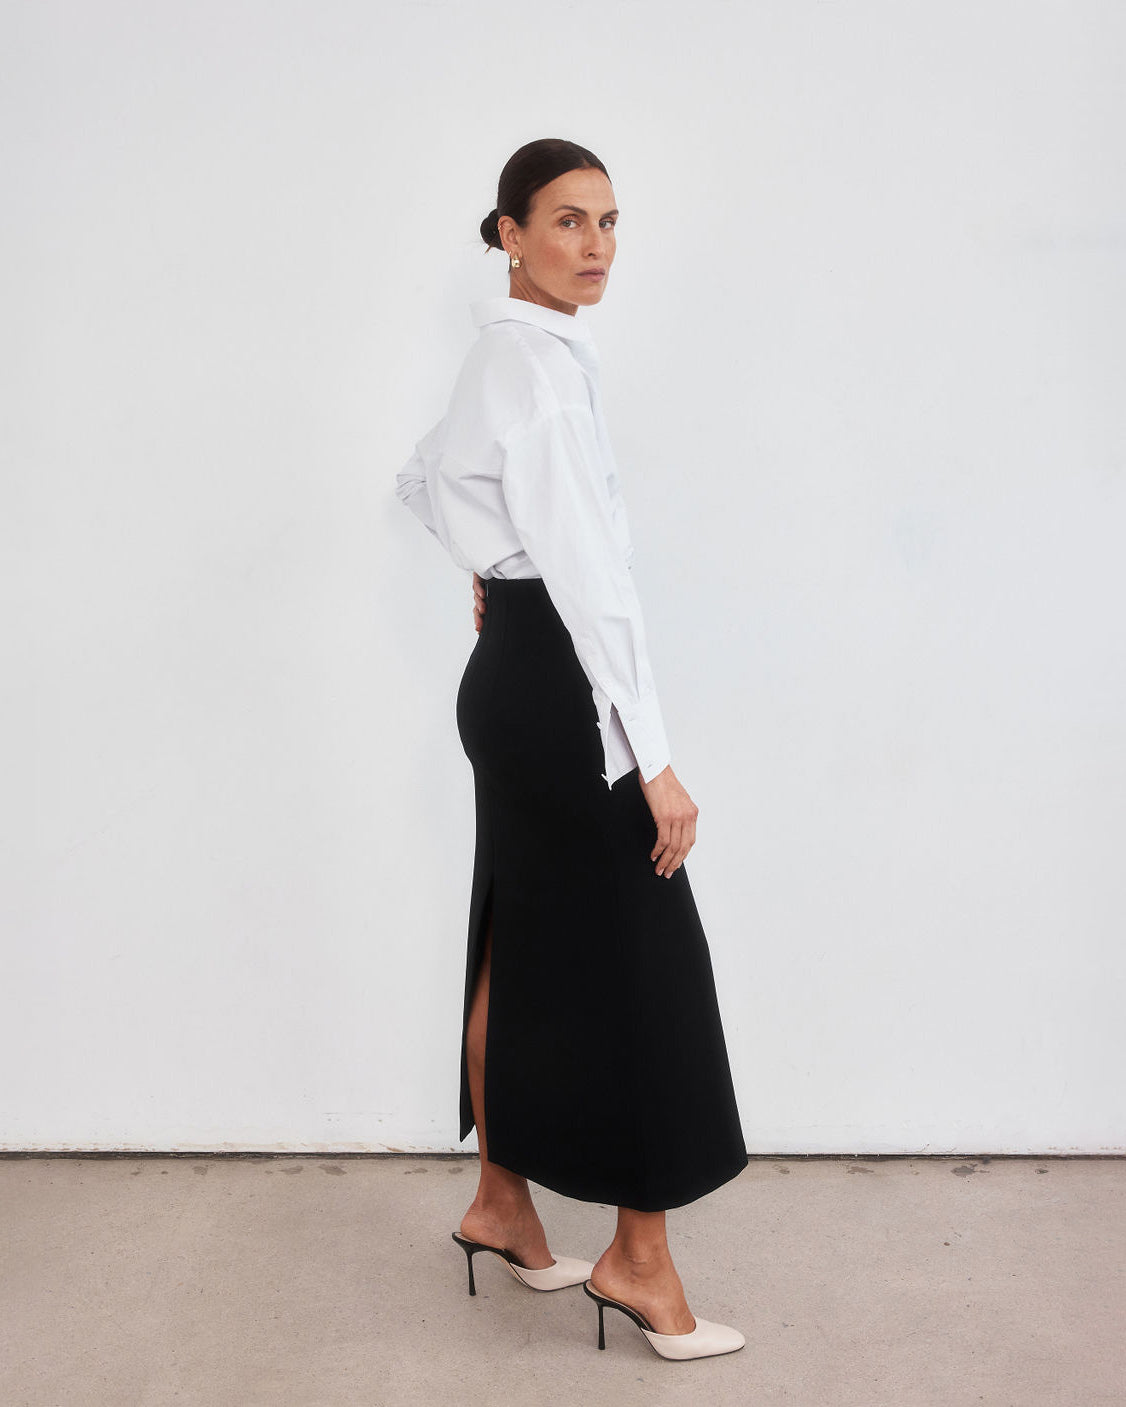 Middle aged women with brown pulled back hair standing with legs slightly apart looking over her right shoulder to the camera. Styled wearing a minimalist crisp white shirt, neatly tucked into a high-waisted maxi length skirt with middle split and cream round-toe mules